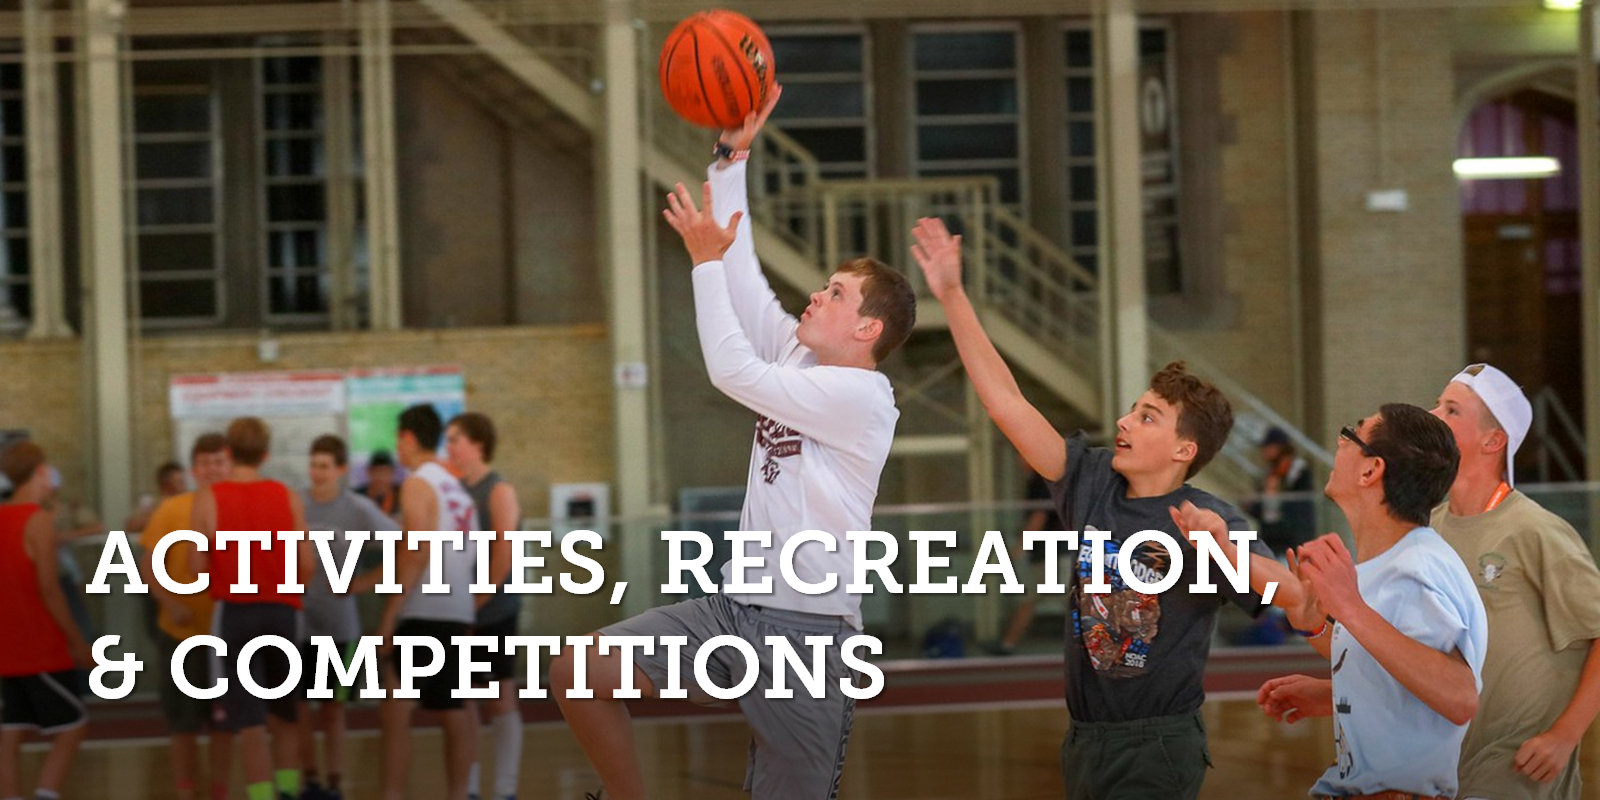 Activities, Recreation, & Competitions